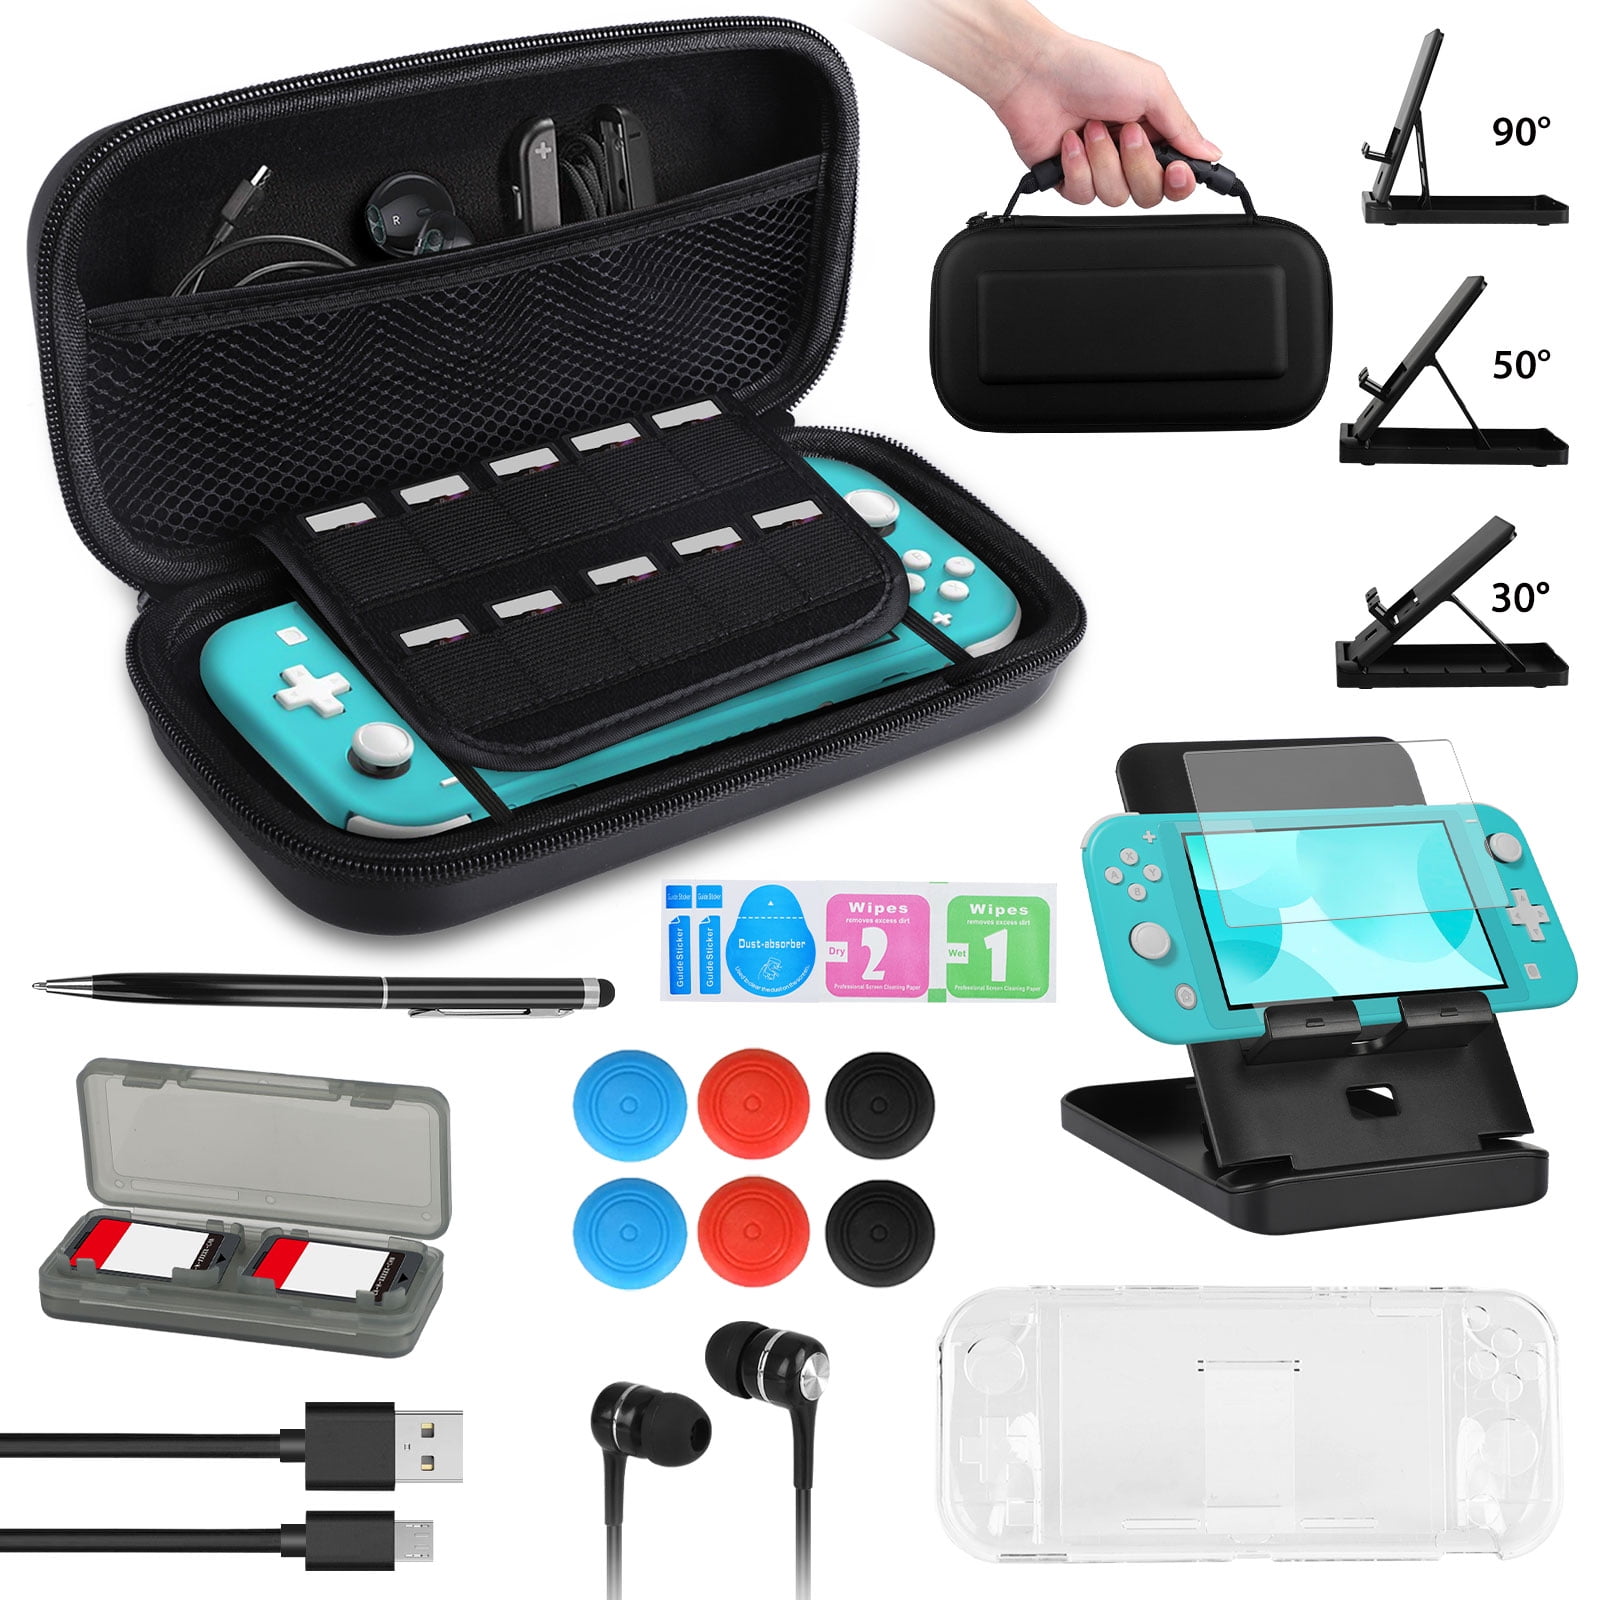 EEEkit 14-in-1 Switch Lite Bundle, Carry Case Fit for Switch Lite Console with Cover Case, Screen Protector, USB Cable, Games Holder, Grip Case, Headphones, Thumb-Grip Pack & More - Walmart.com